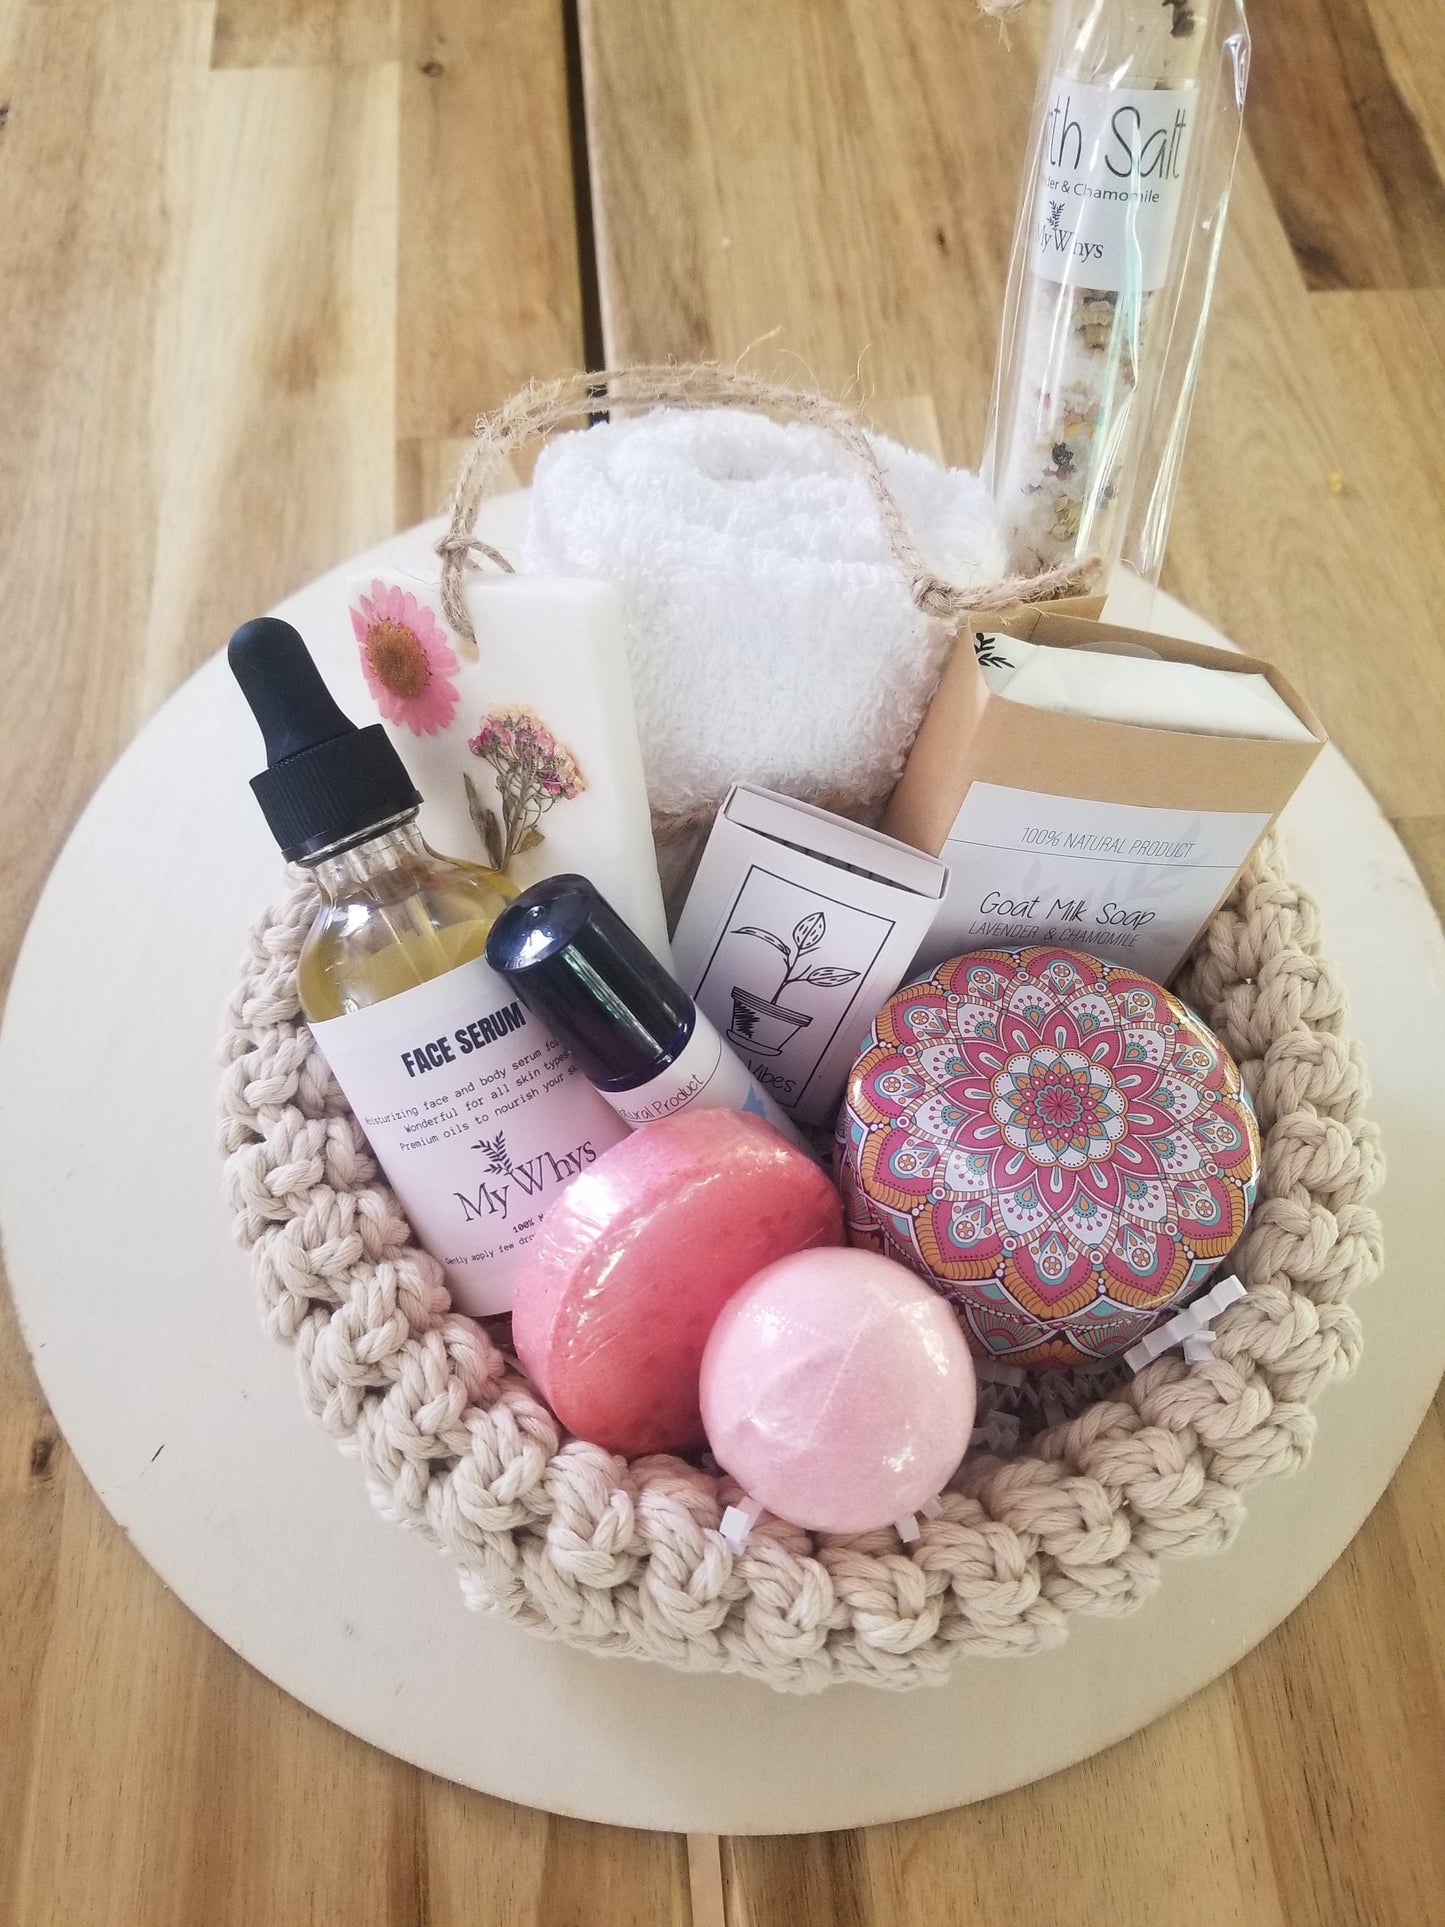 Make yourself a priority Spa gift set, send a care package